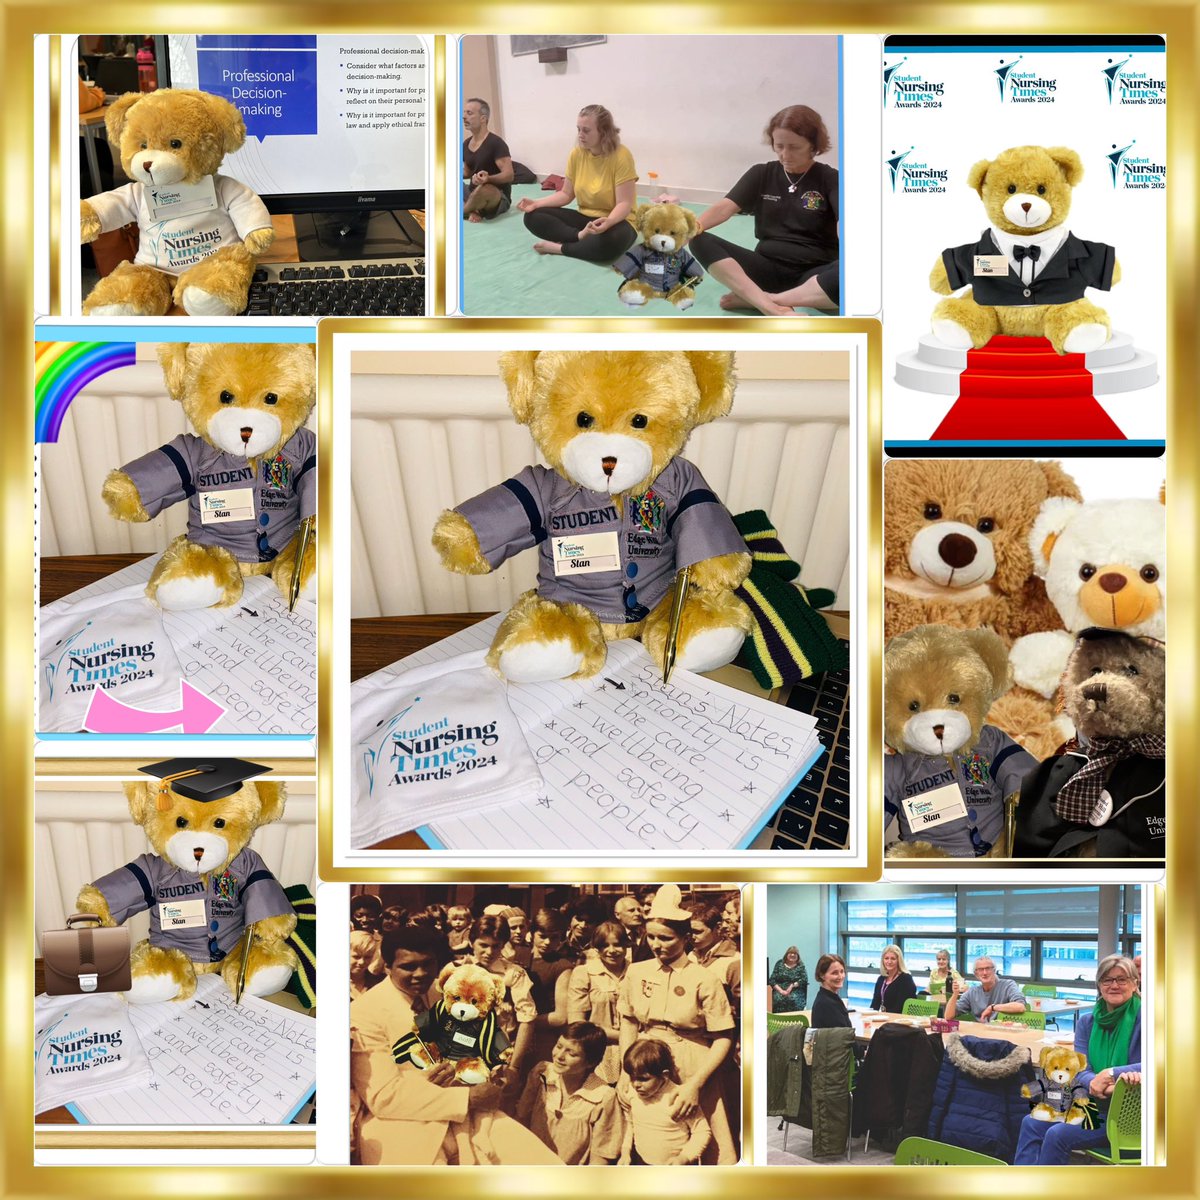 What a busy week for Stan , he is thinking back on some of the highlights, too many to note all of them but he has had an eventful time and is beary glad to have been a student nurse.@NursingTimes #SNTABear